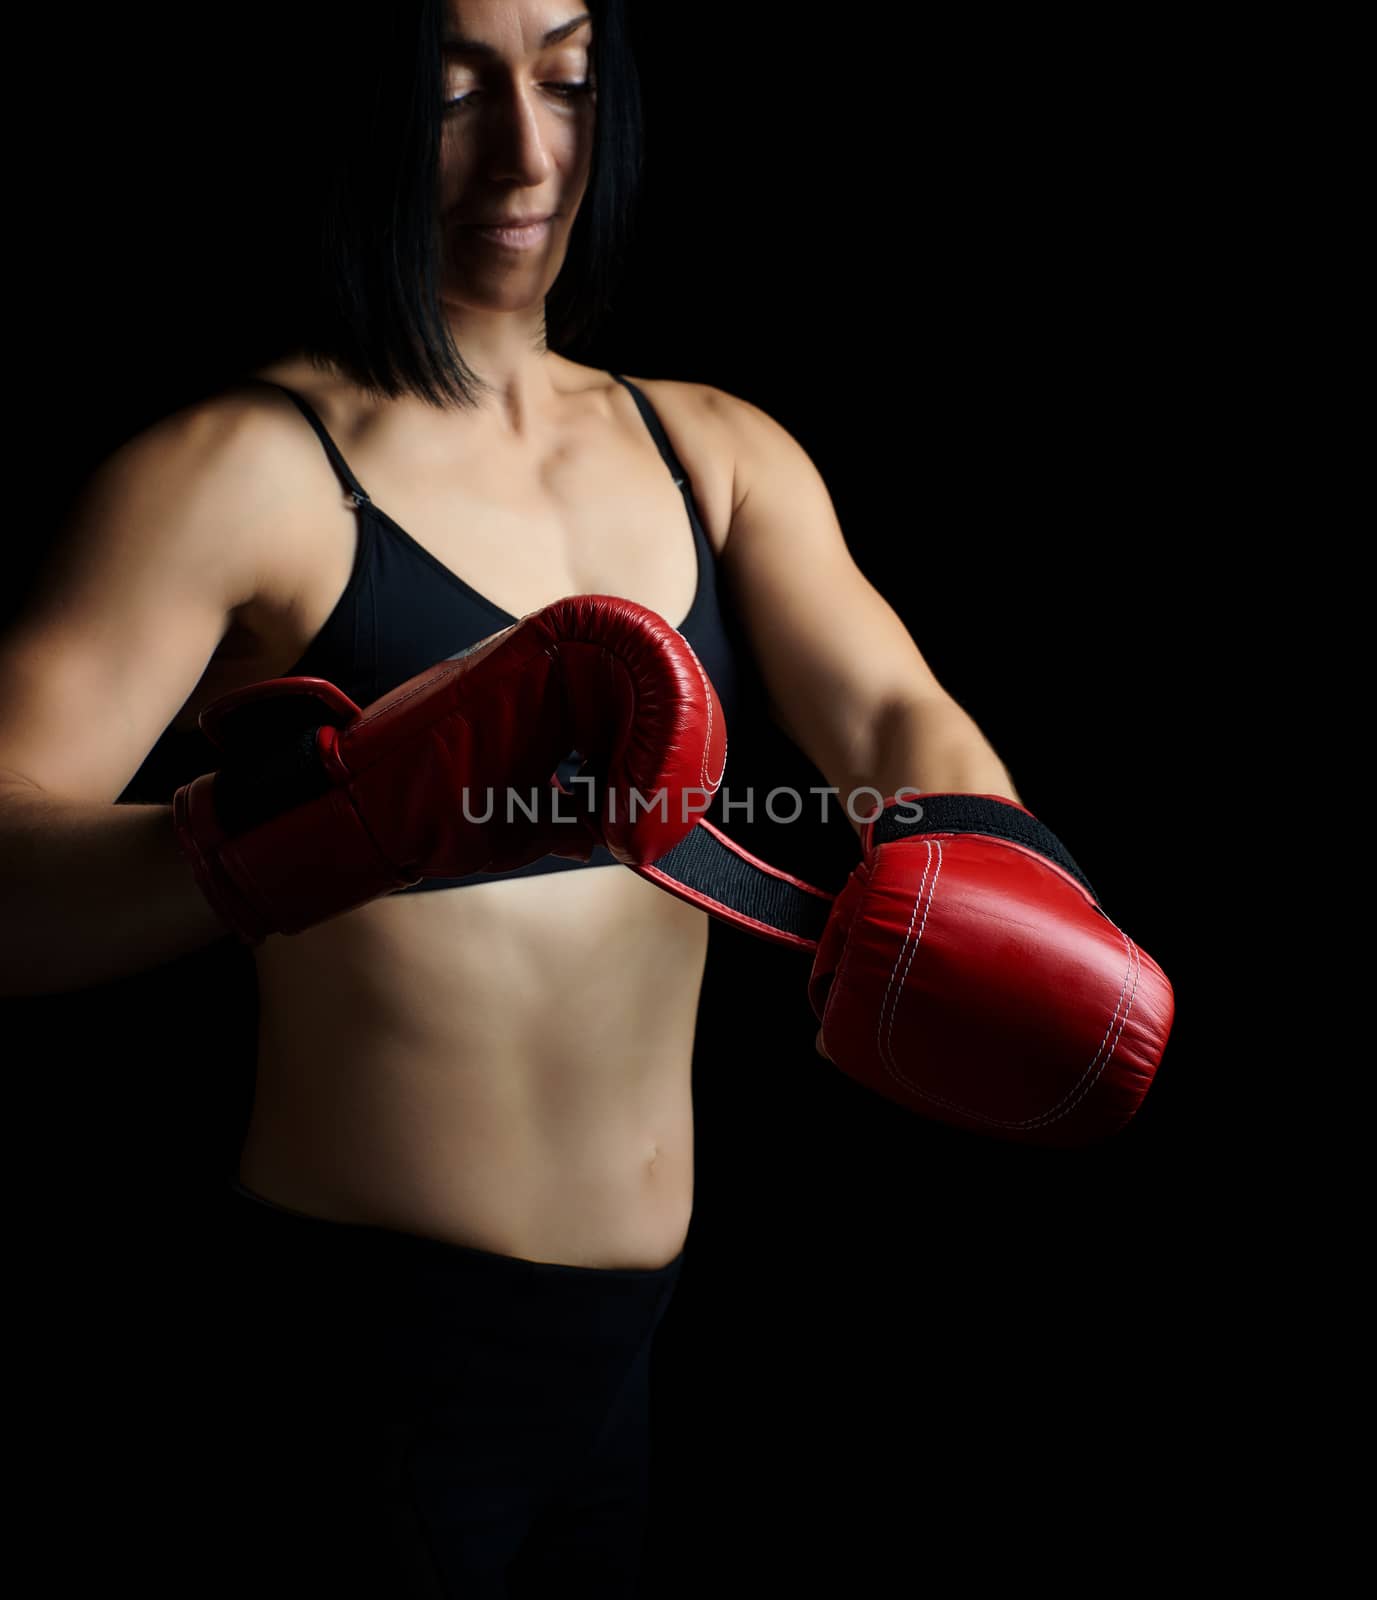 beautiful young girl of athletic appearance with black hair dresses red leather boxing gloves, low key